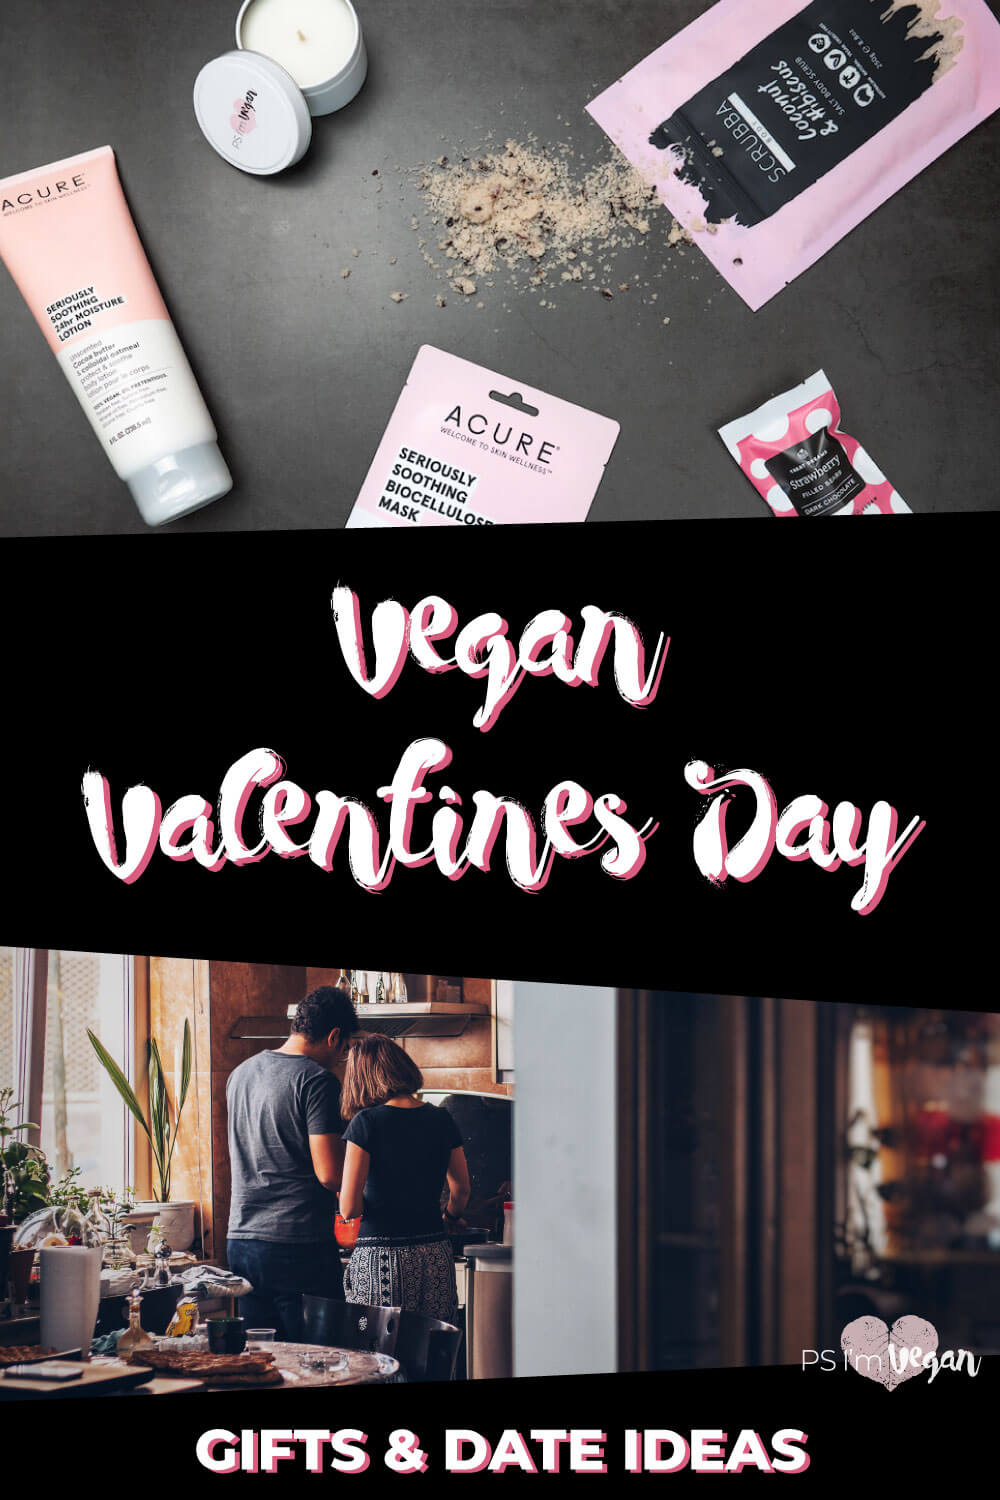 Need vegan Valentine’s Day gifts and romantic date ideas for that special someone? We’ve got you covered with our huge guide including vegan Valentine’s day recipes for desserts, heart-shaped cookies, romantic mains and entrees, a vegan charcuterie board to take on a picnic, and more. Plus the best vegan gifts to buy, vegan chocolates, cheese and champagne and how to find vegan restaurants near you! 💝🌱🍫
#vegan #valentinesday #romantic #PSIV #vegangifts #shop